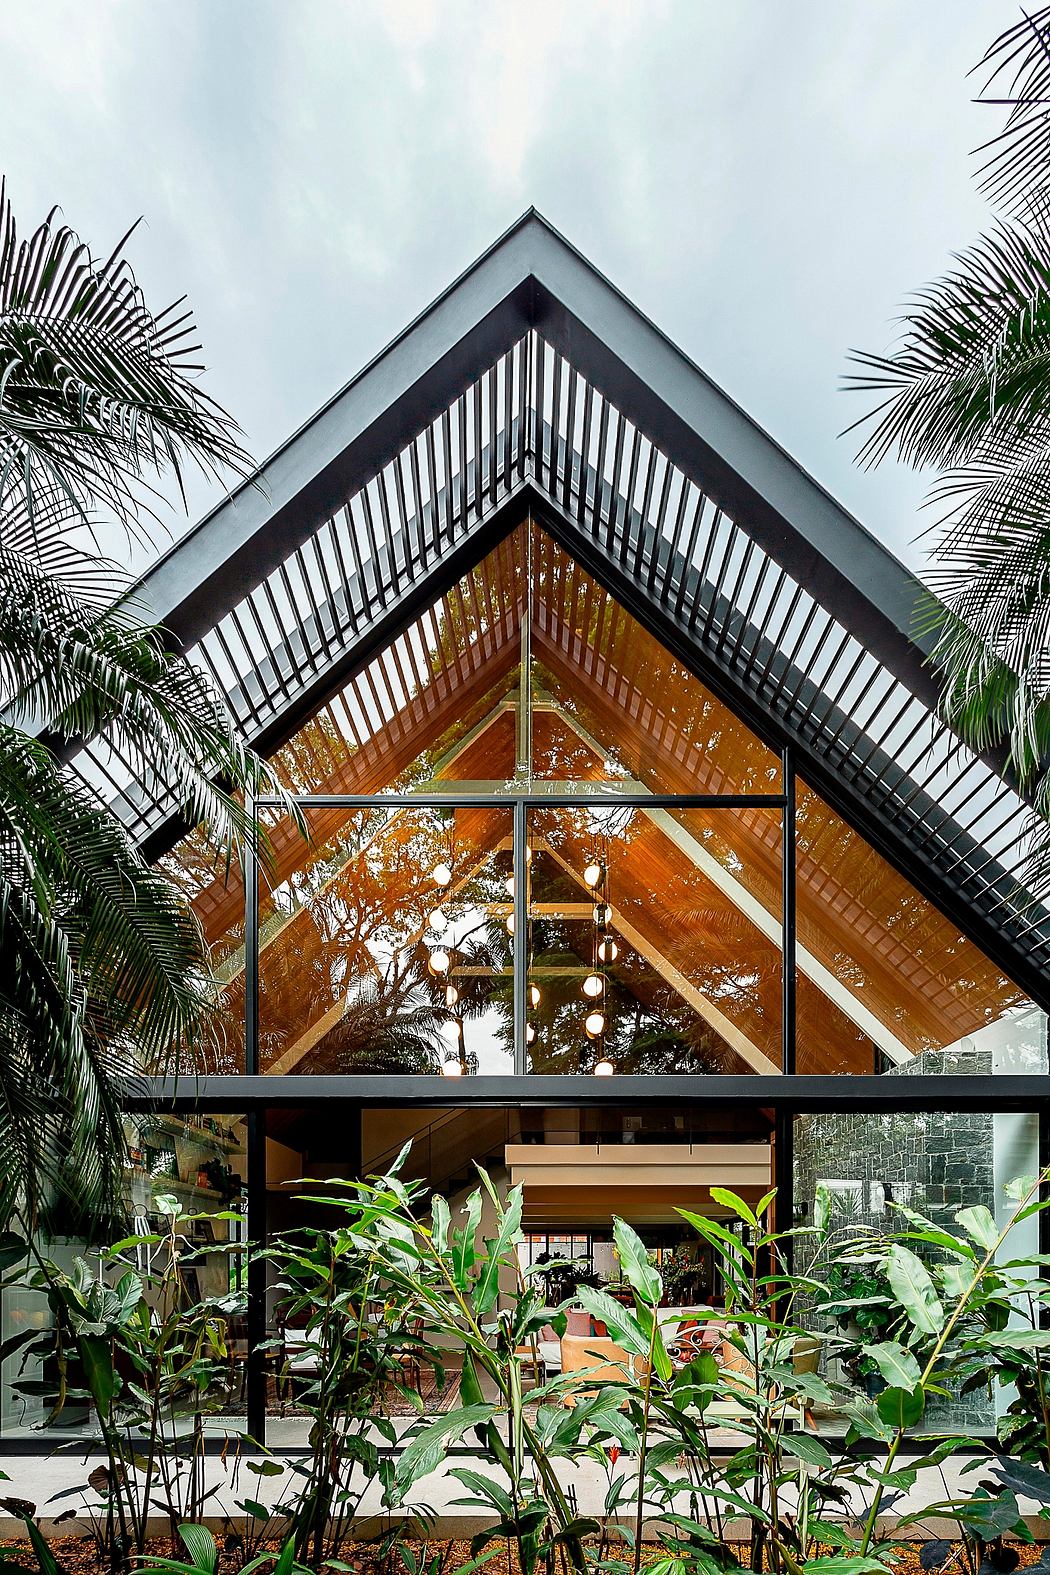 Modern A-frame house with large glass windows surrounded by greenery.